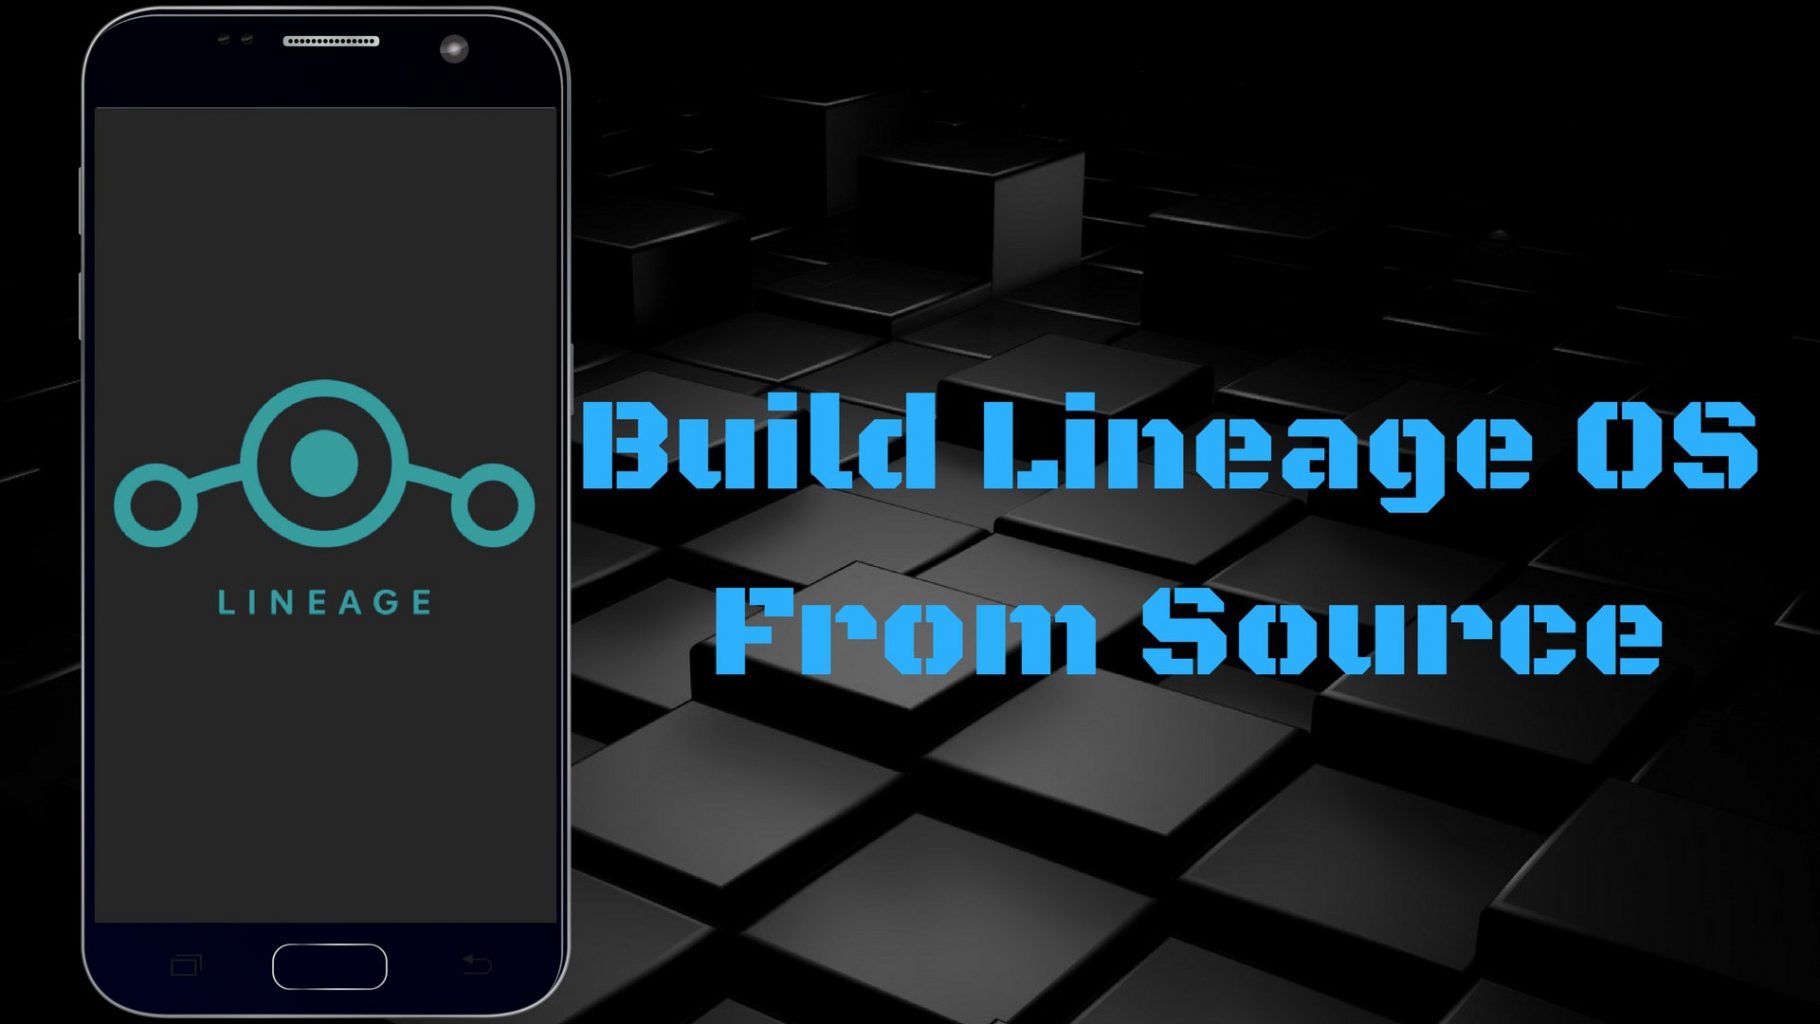 Build Lineage OS from Source